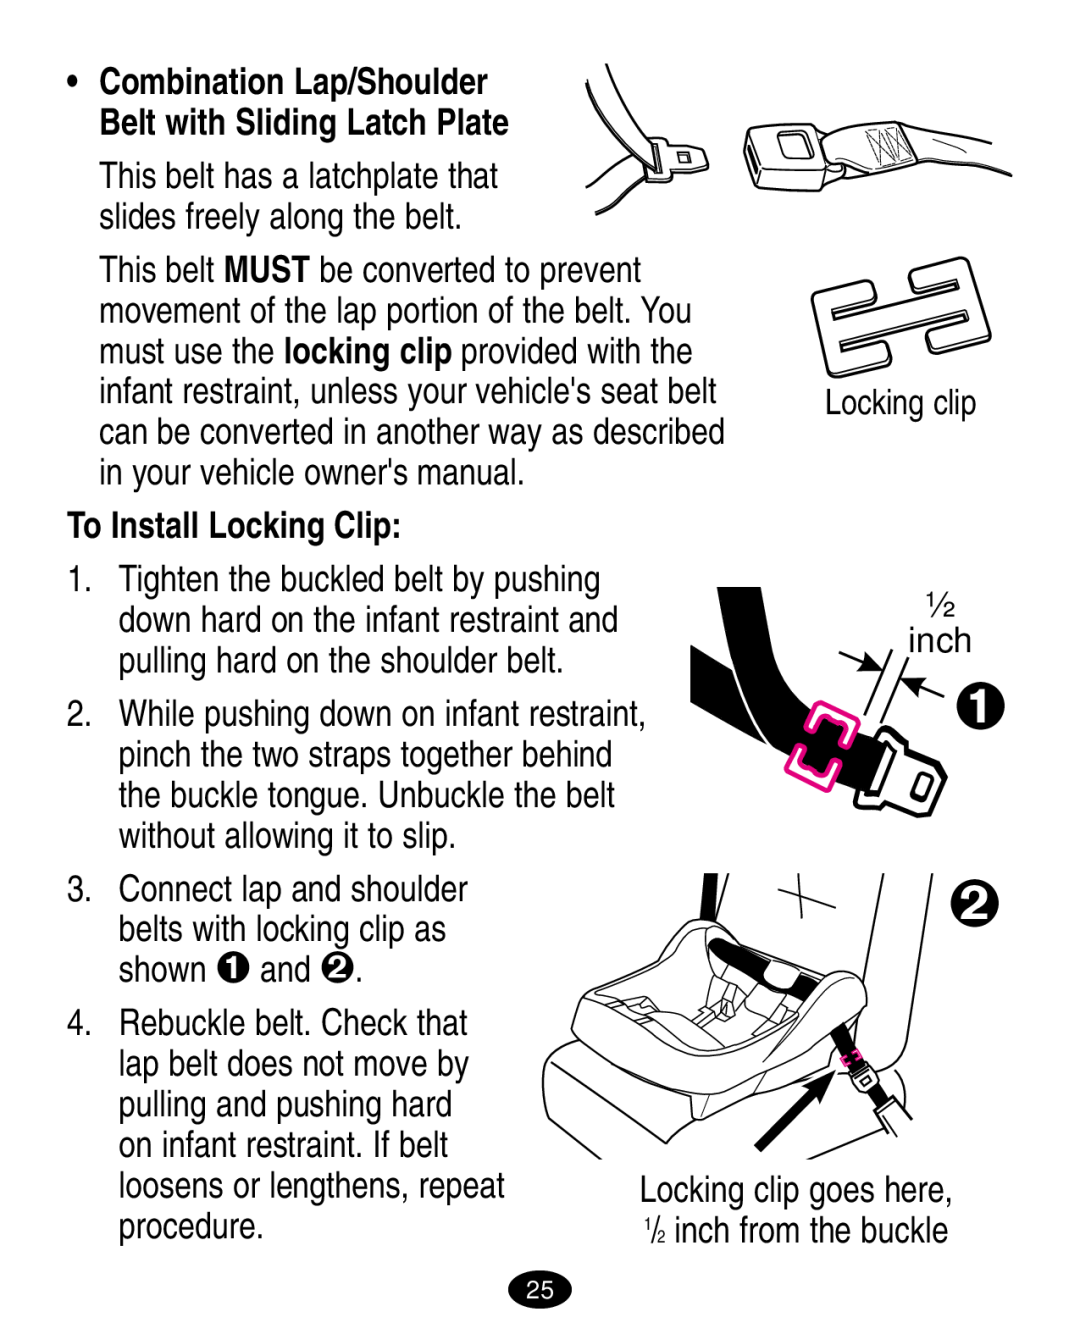 Graco ISPA005AA in your vehicle owners manual, To Install Locking Clip 